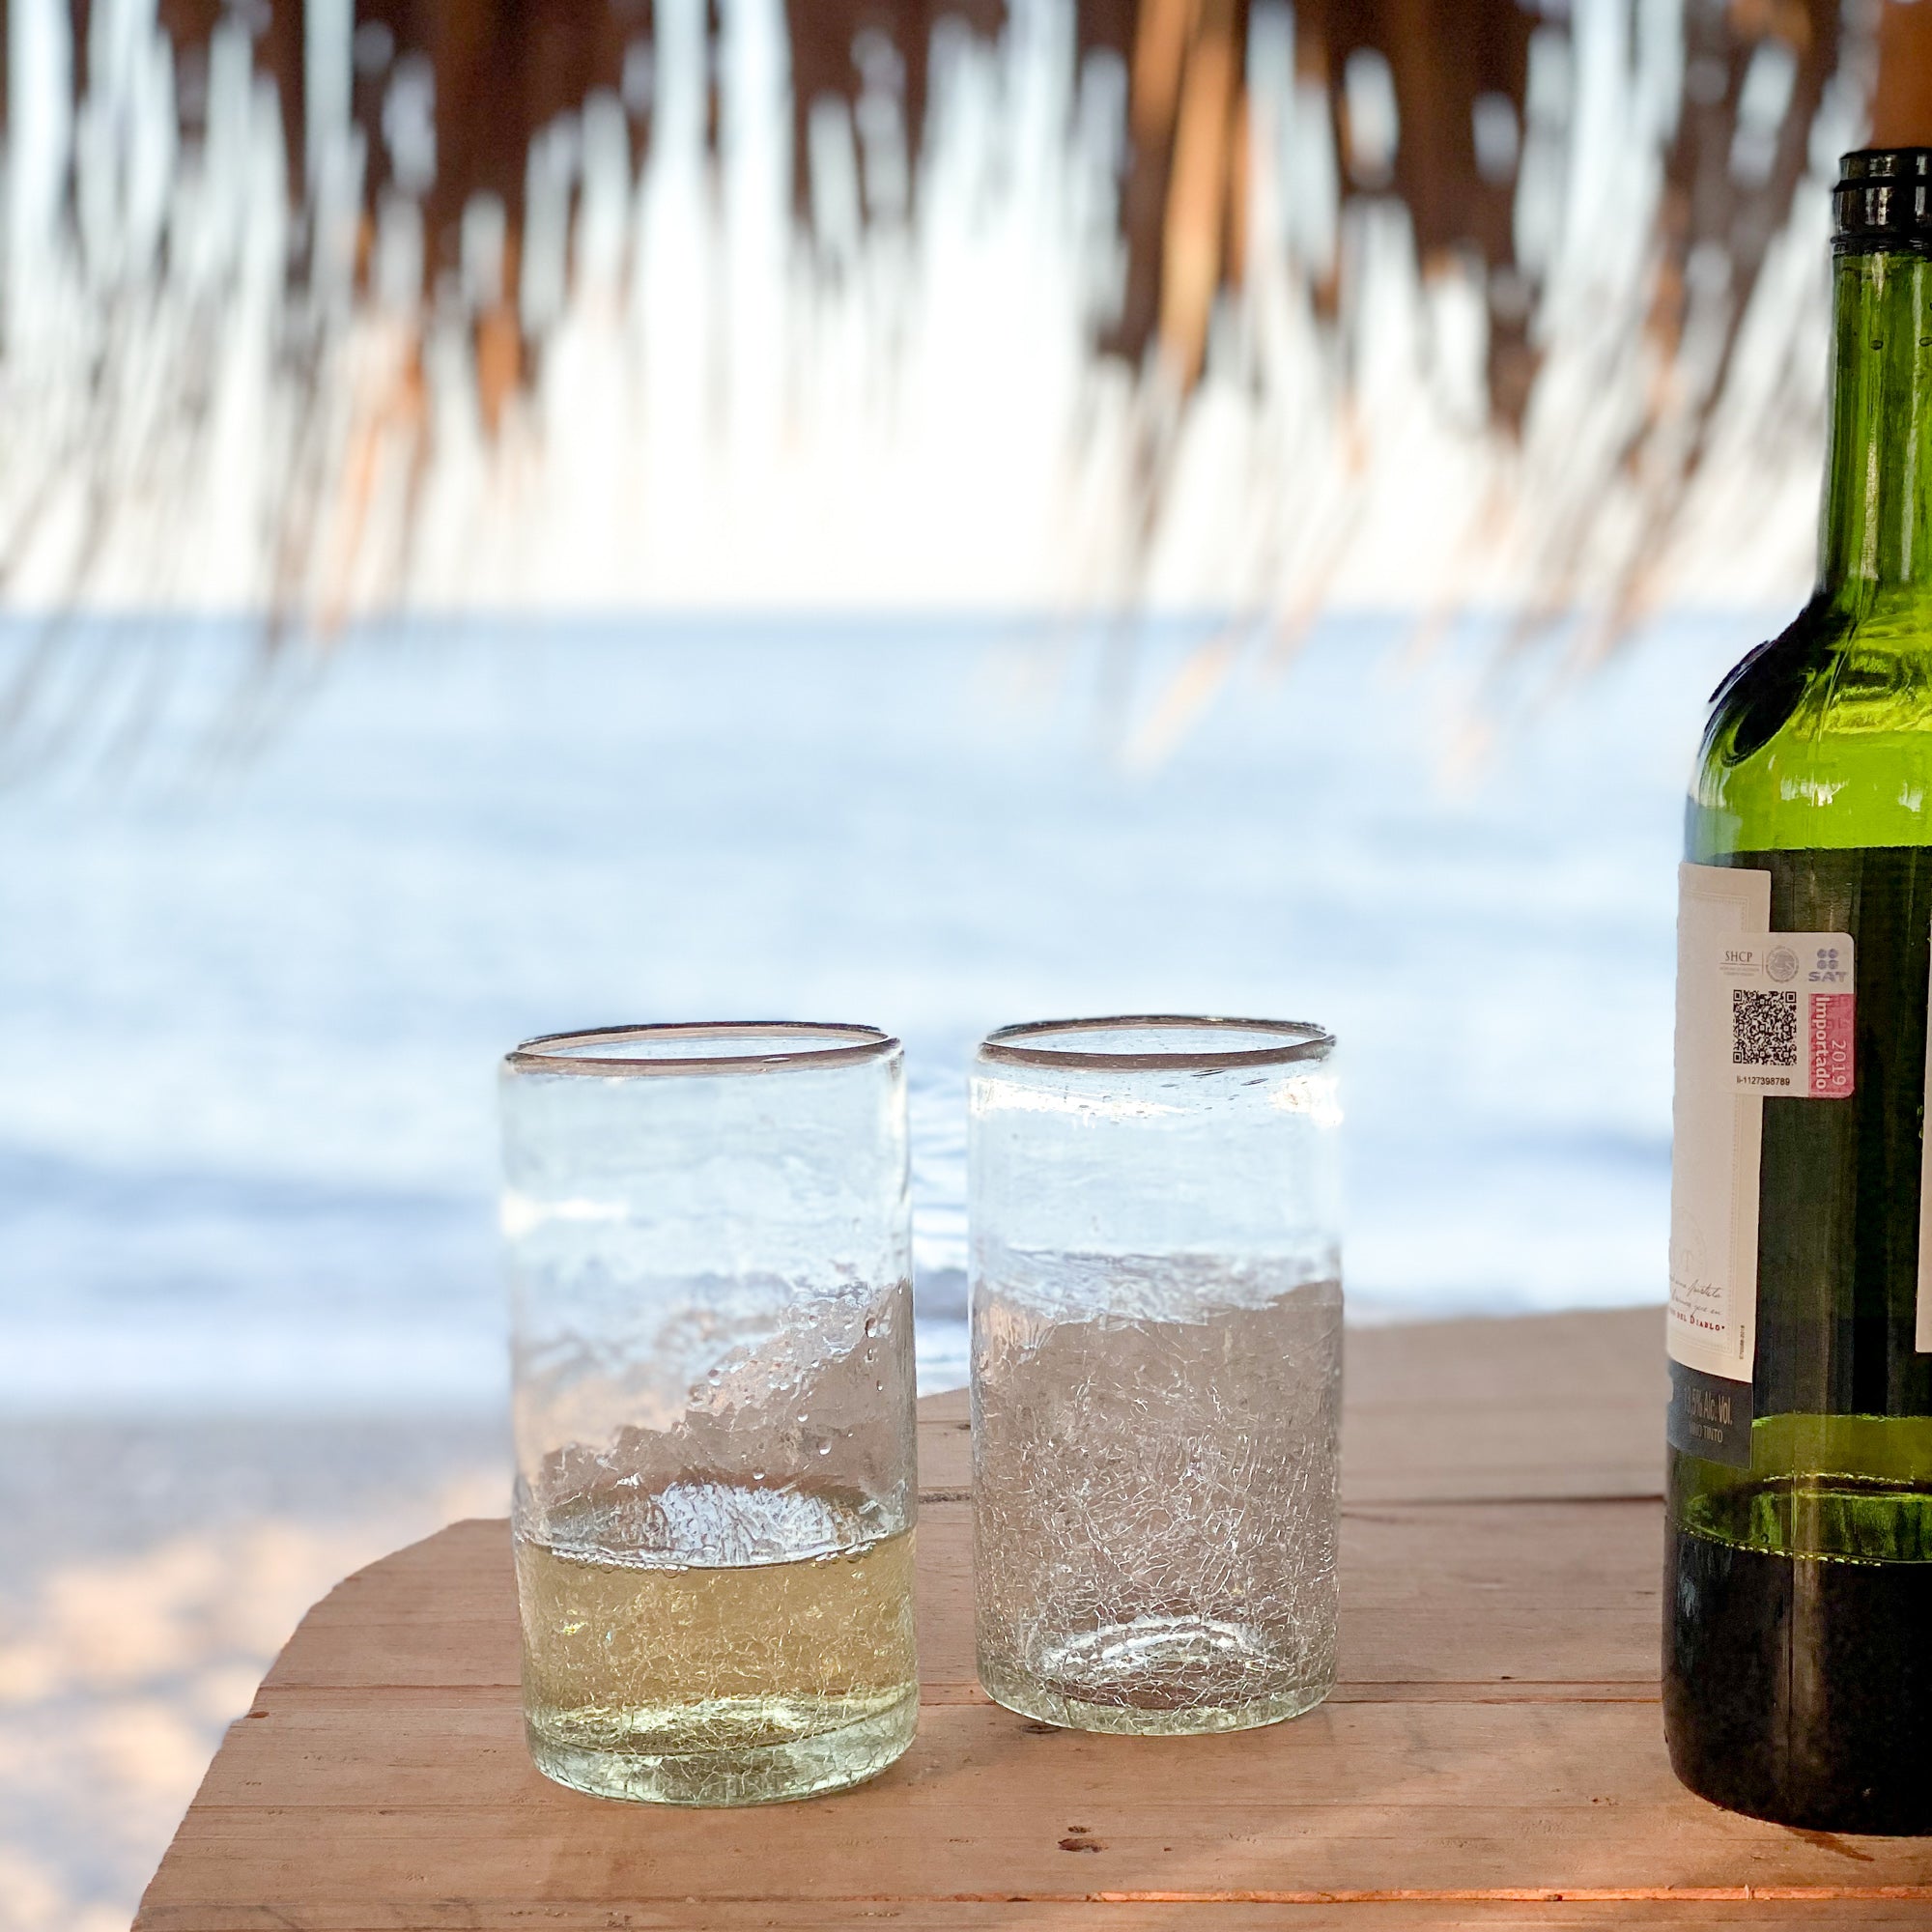 A pair of two Baja glass tumblers on a table overlooking the sea.